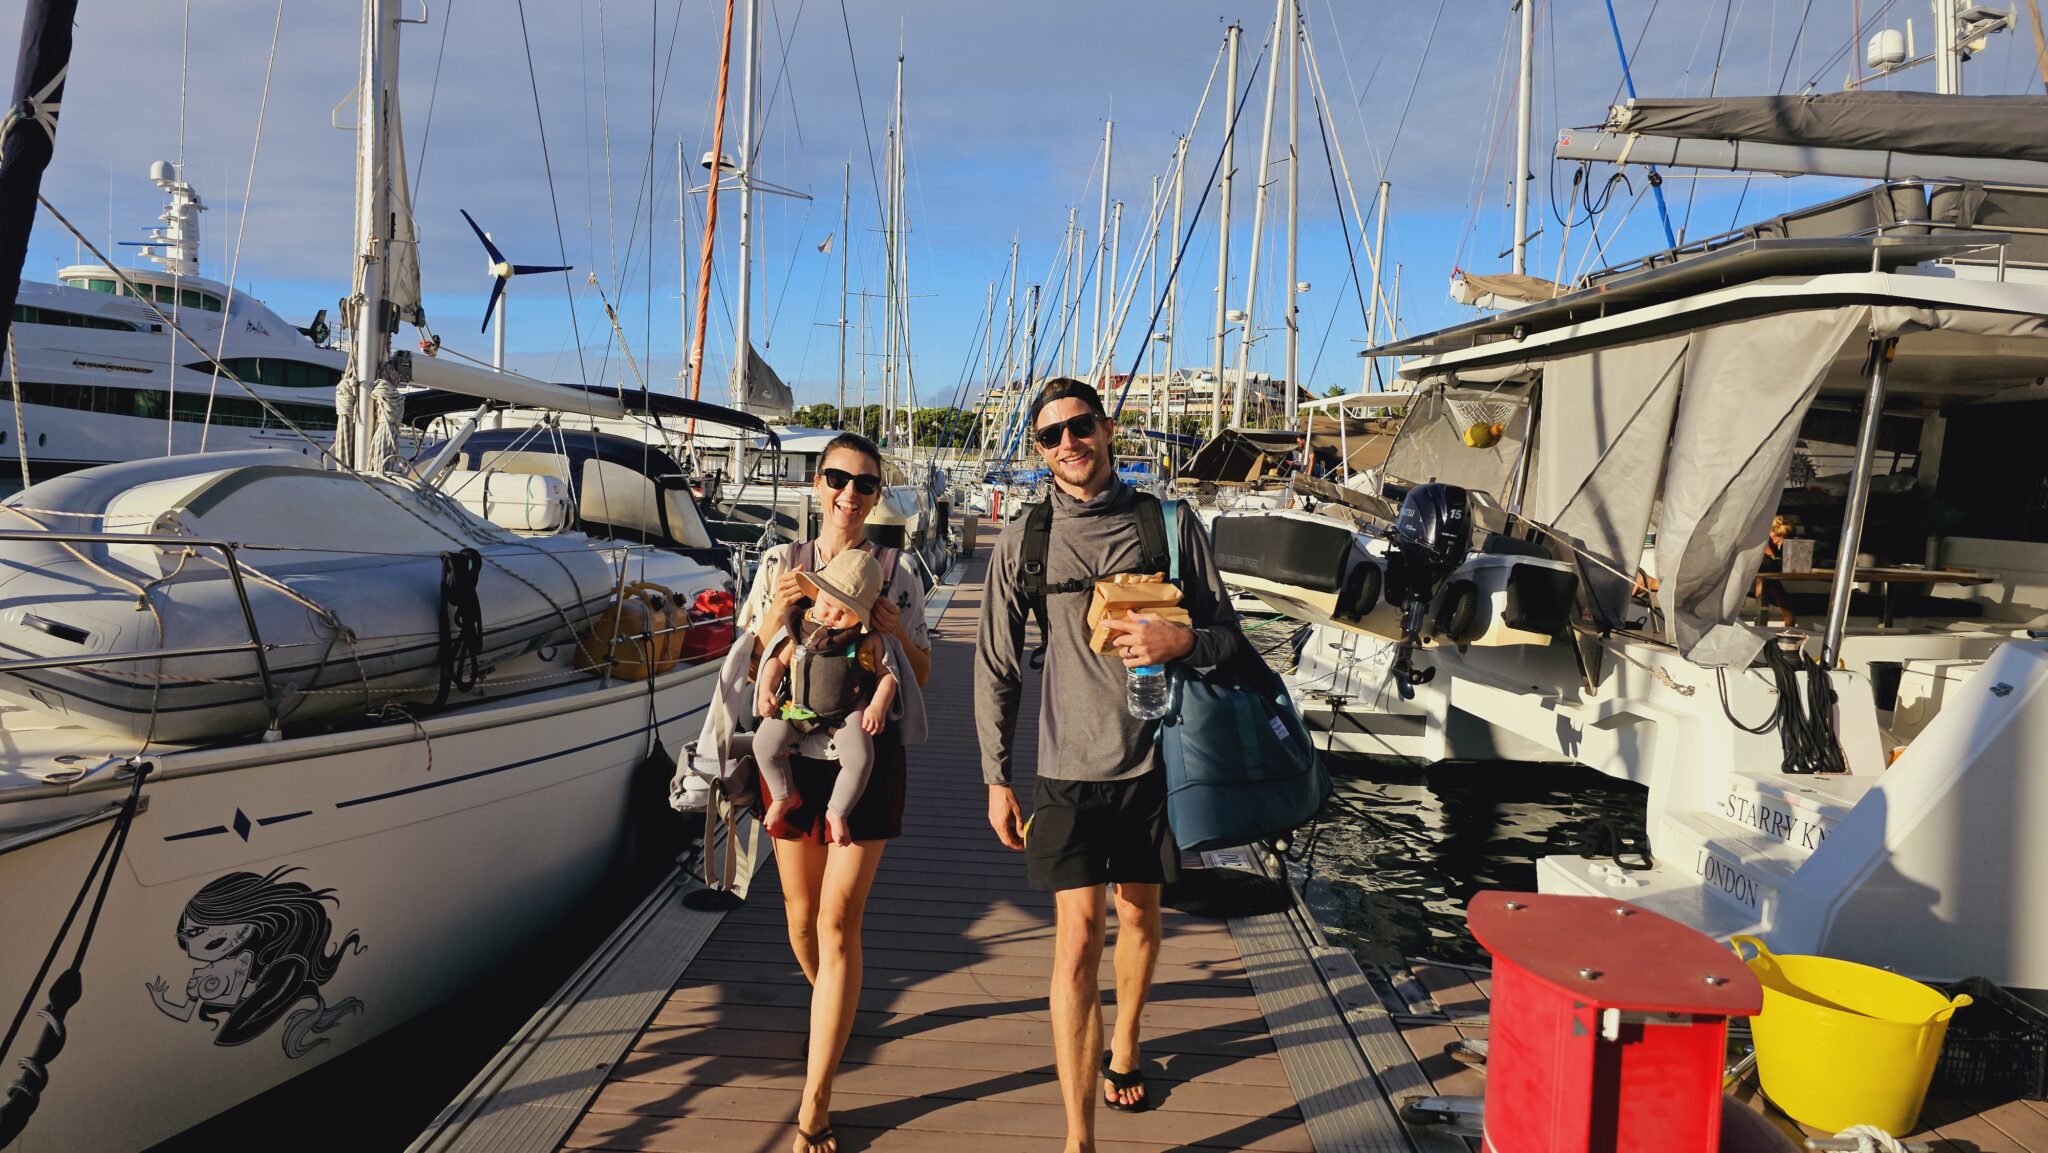 Paulina, Mathias and Teo arriving from Moorea where they have their boat